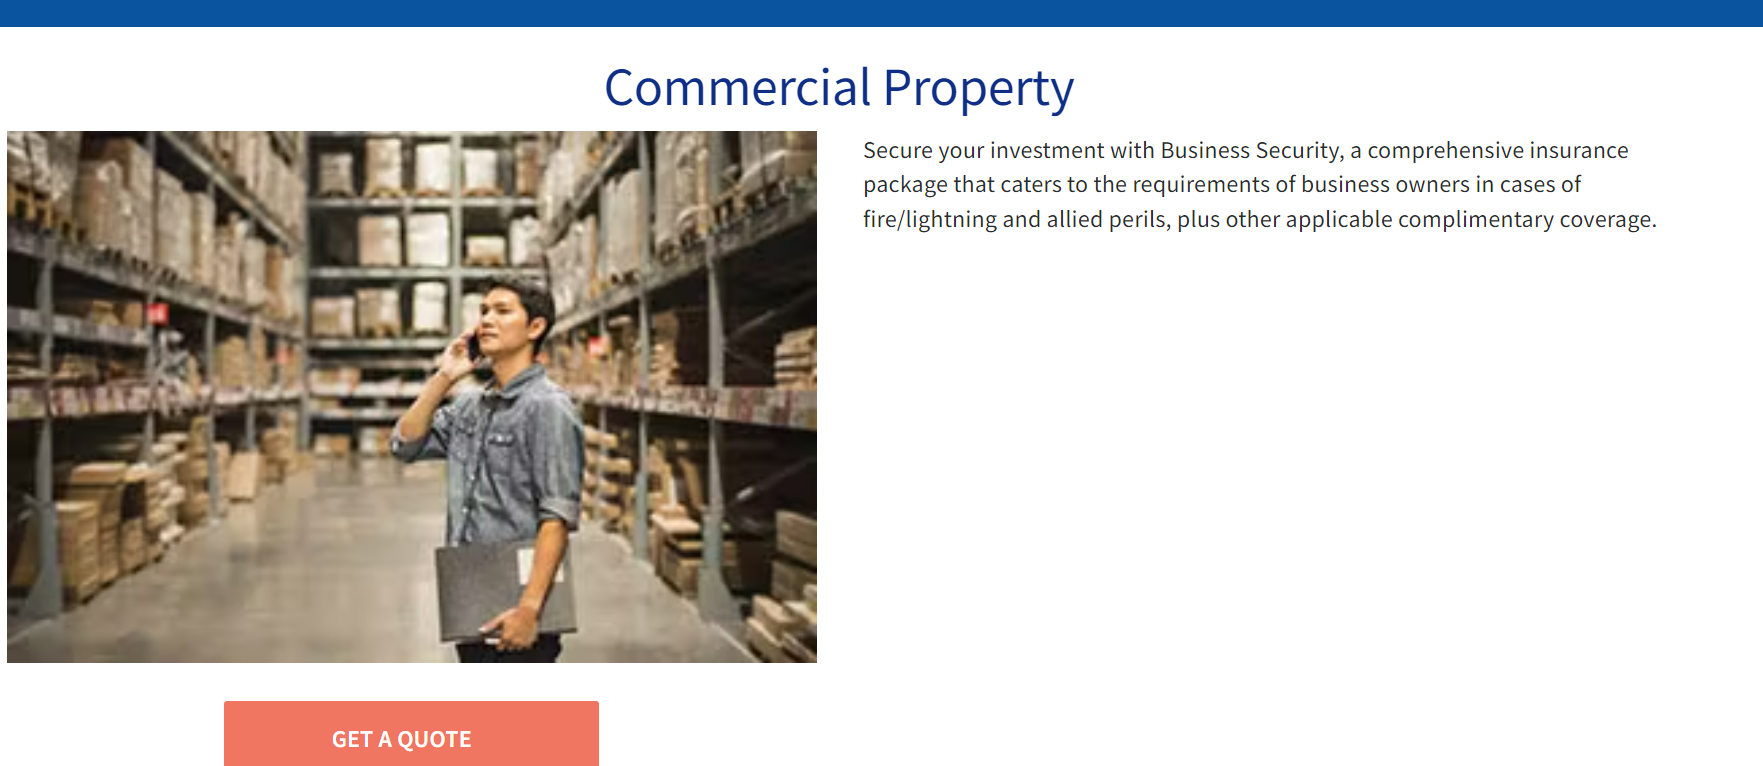 business insurance philippines - axa business security